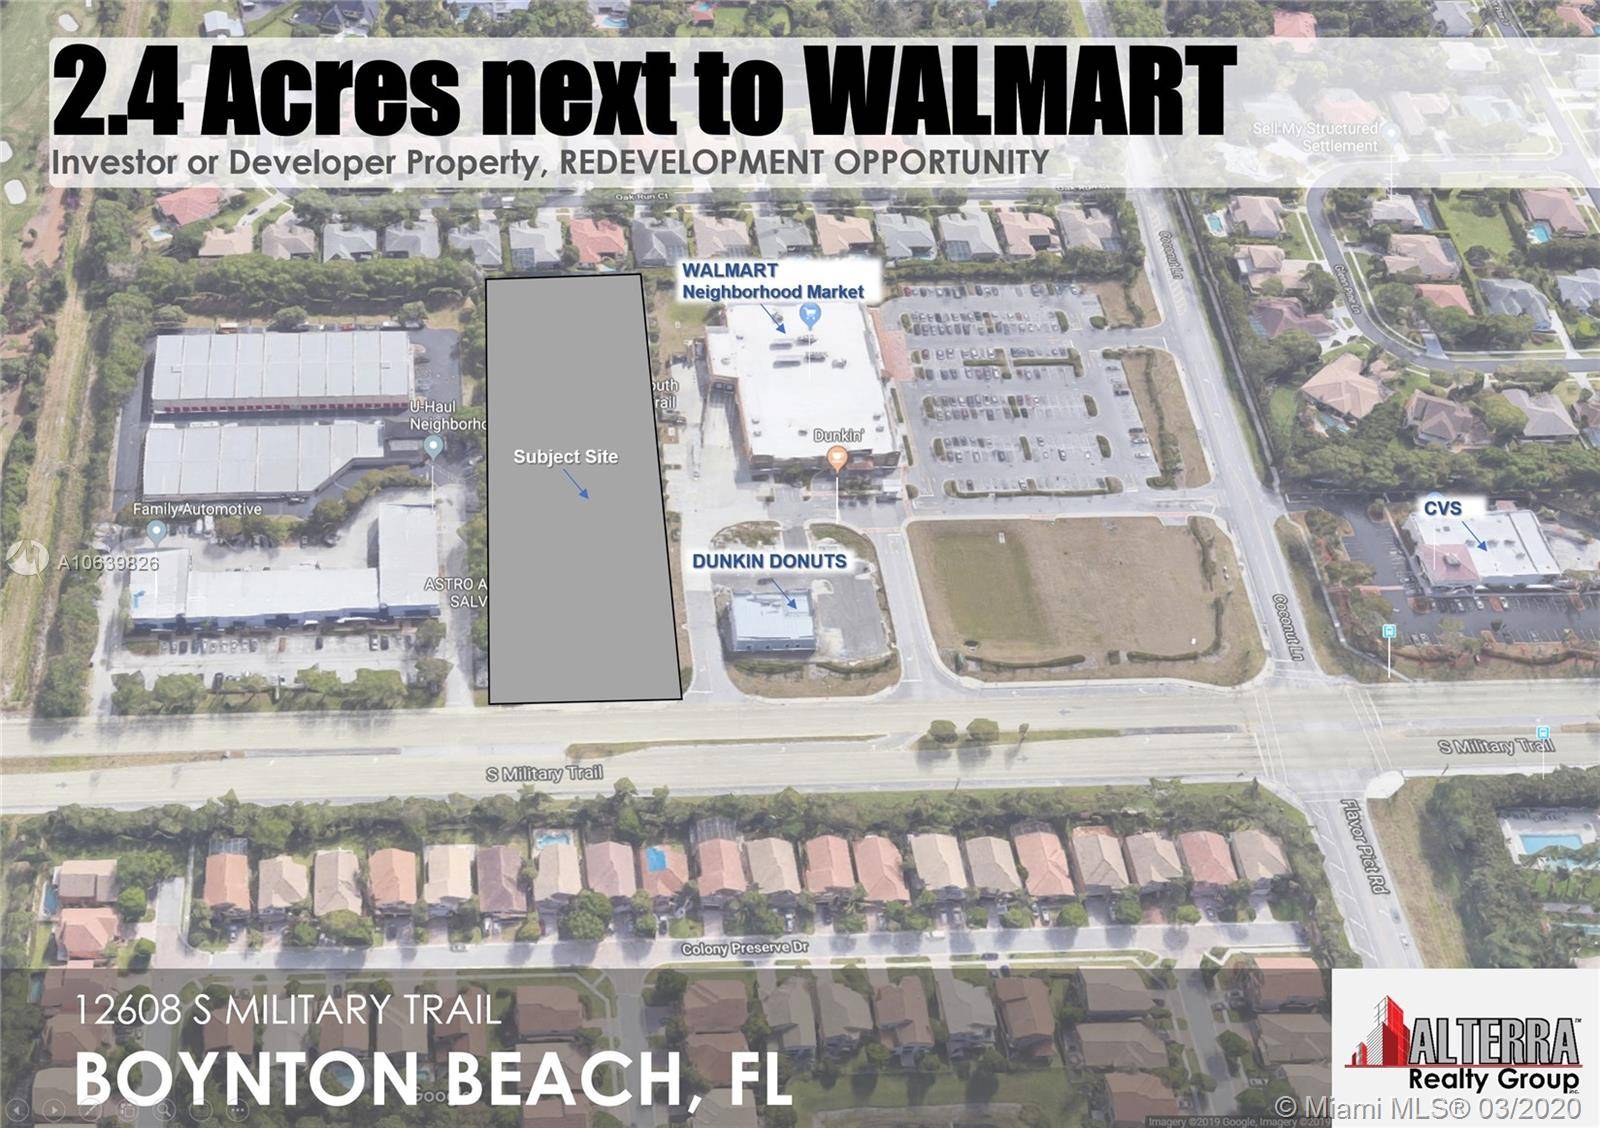 Awesome 2. 4 Acre next to WALMART ; perfectly situated for redevelopment.